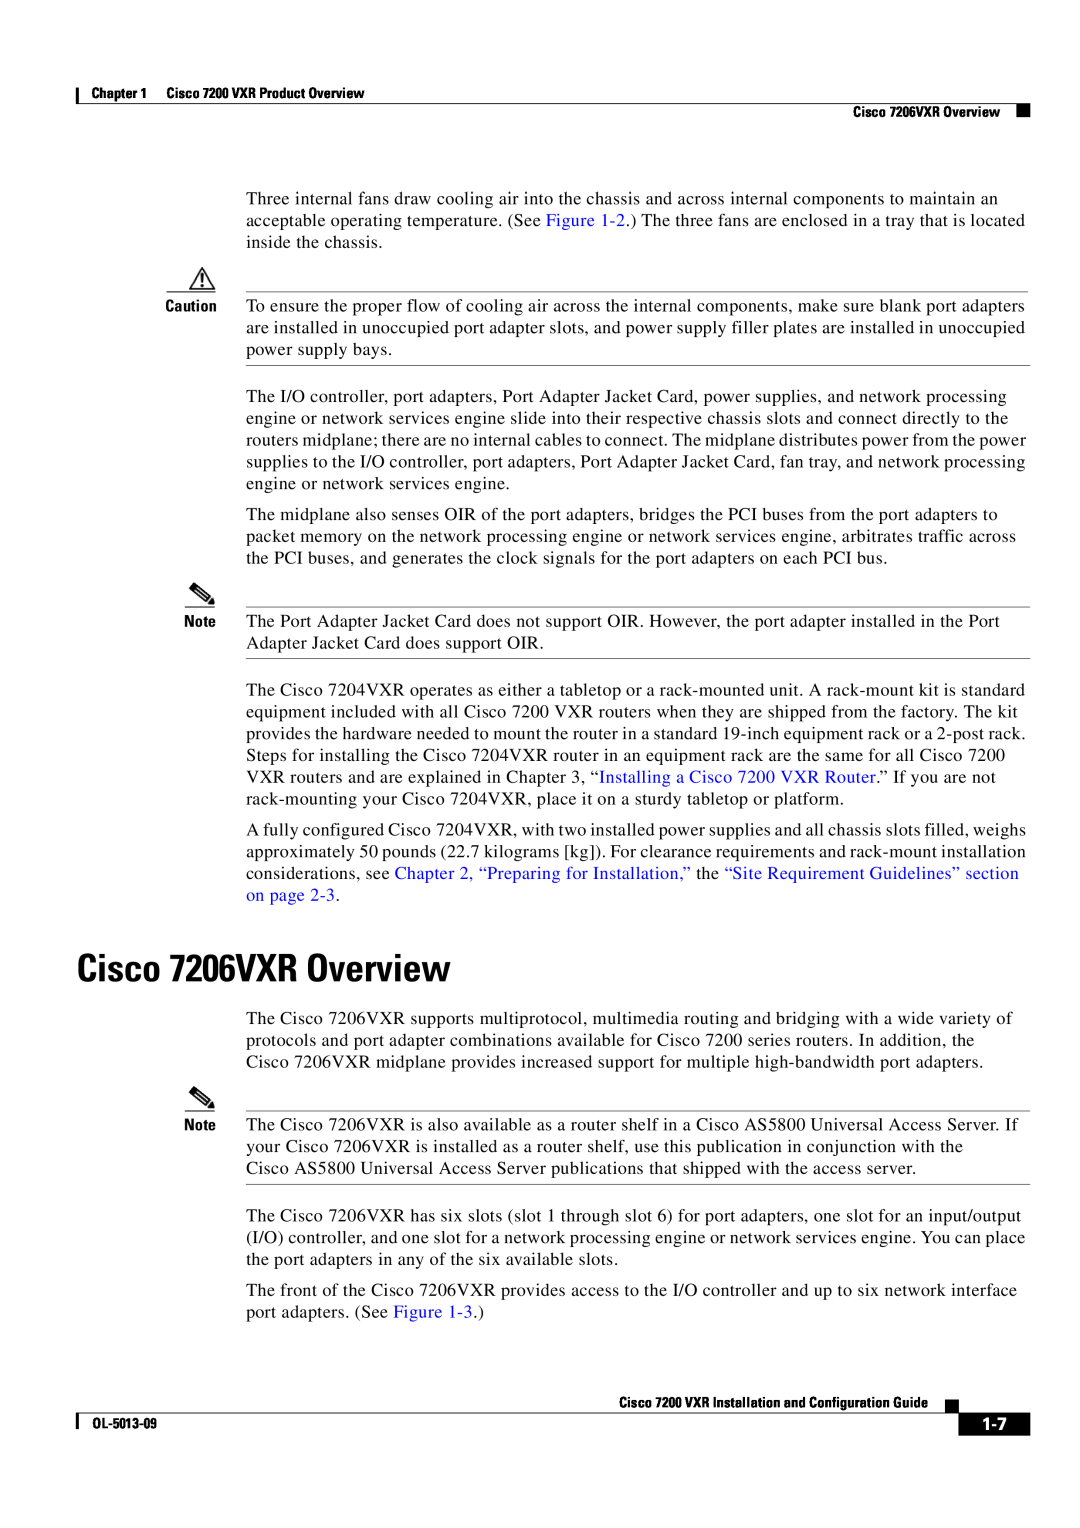 Cisco Systems manual Cisco 7200 VXR Product Overview Cisco 7206VXR Overview, OL-5013-09 